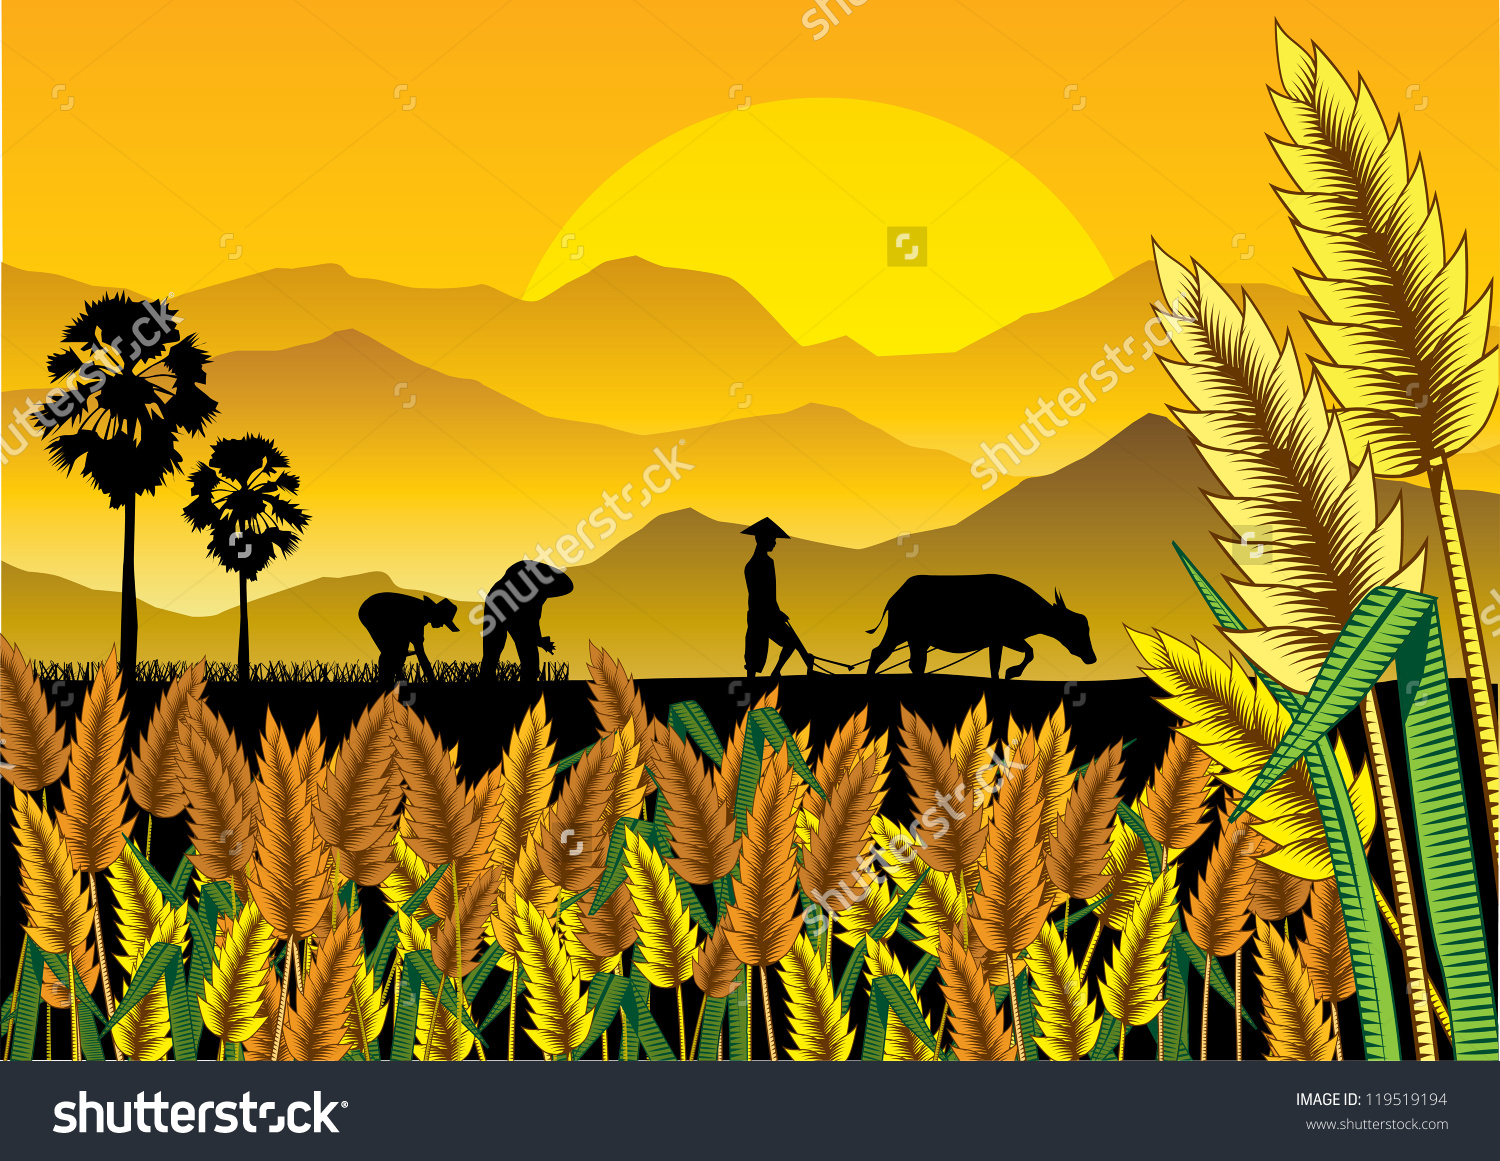 harvesting rice field clipart - Clip Art Library